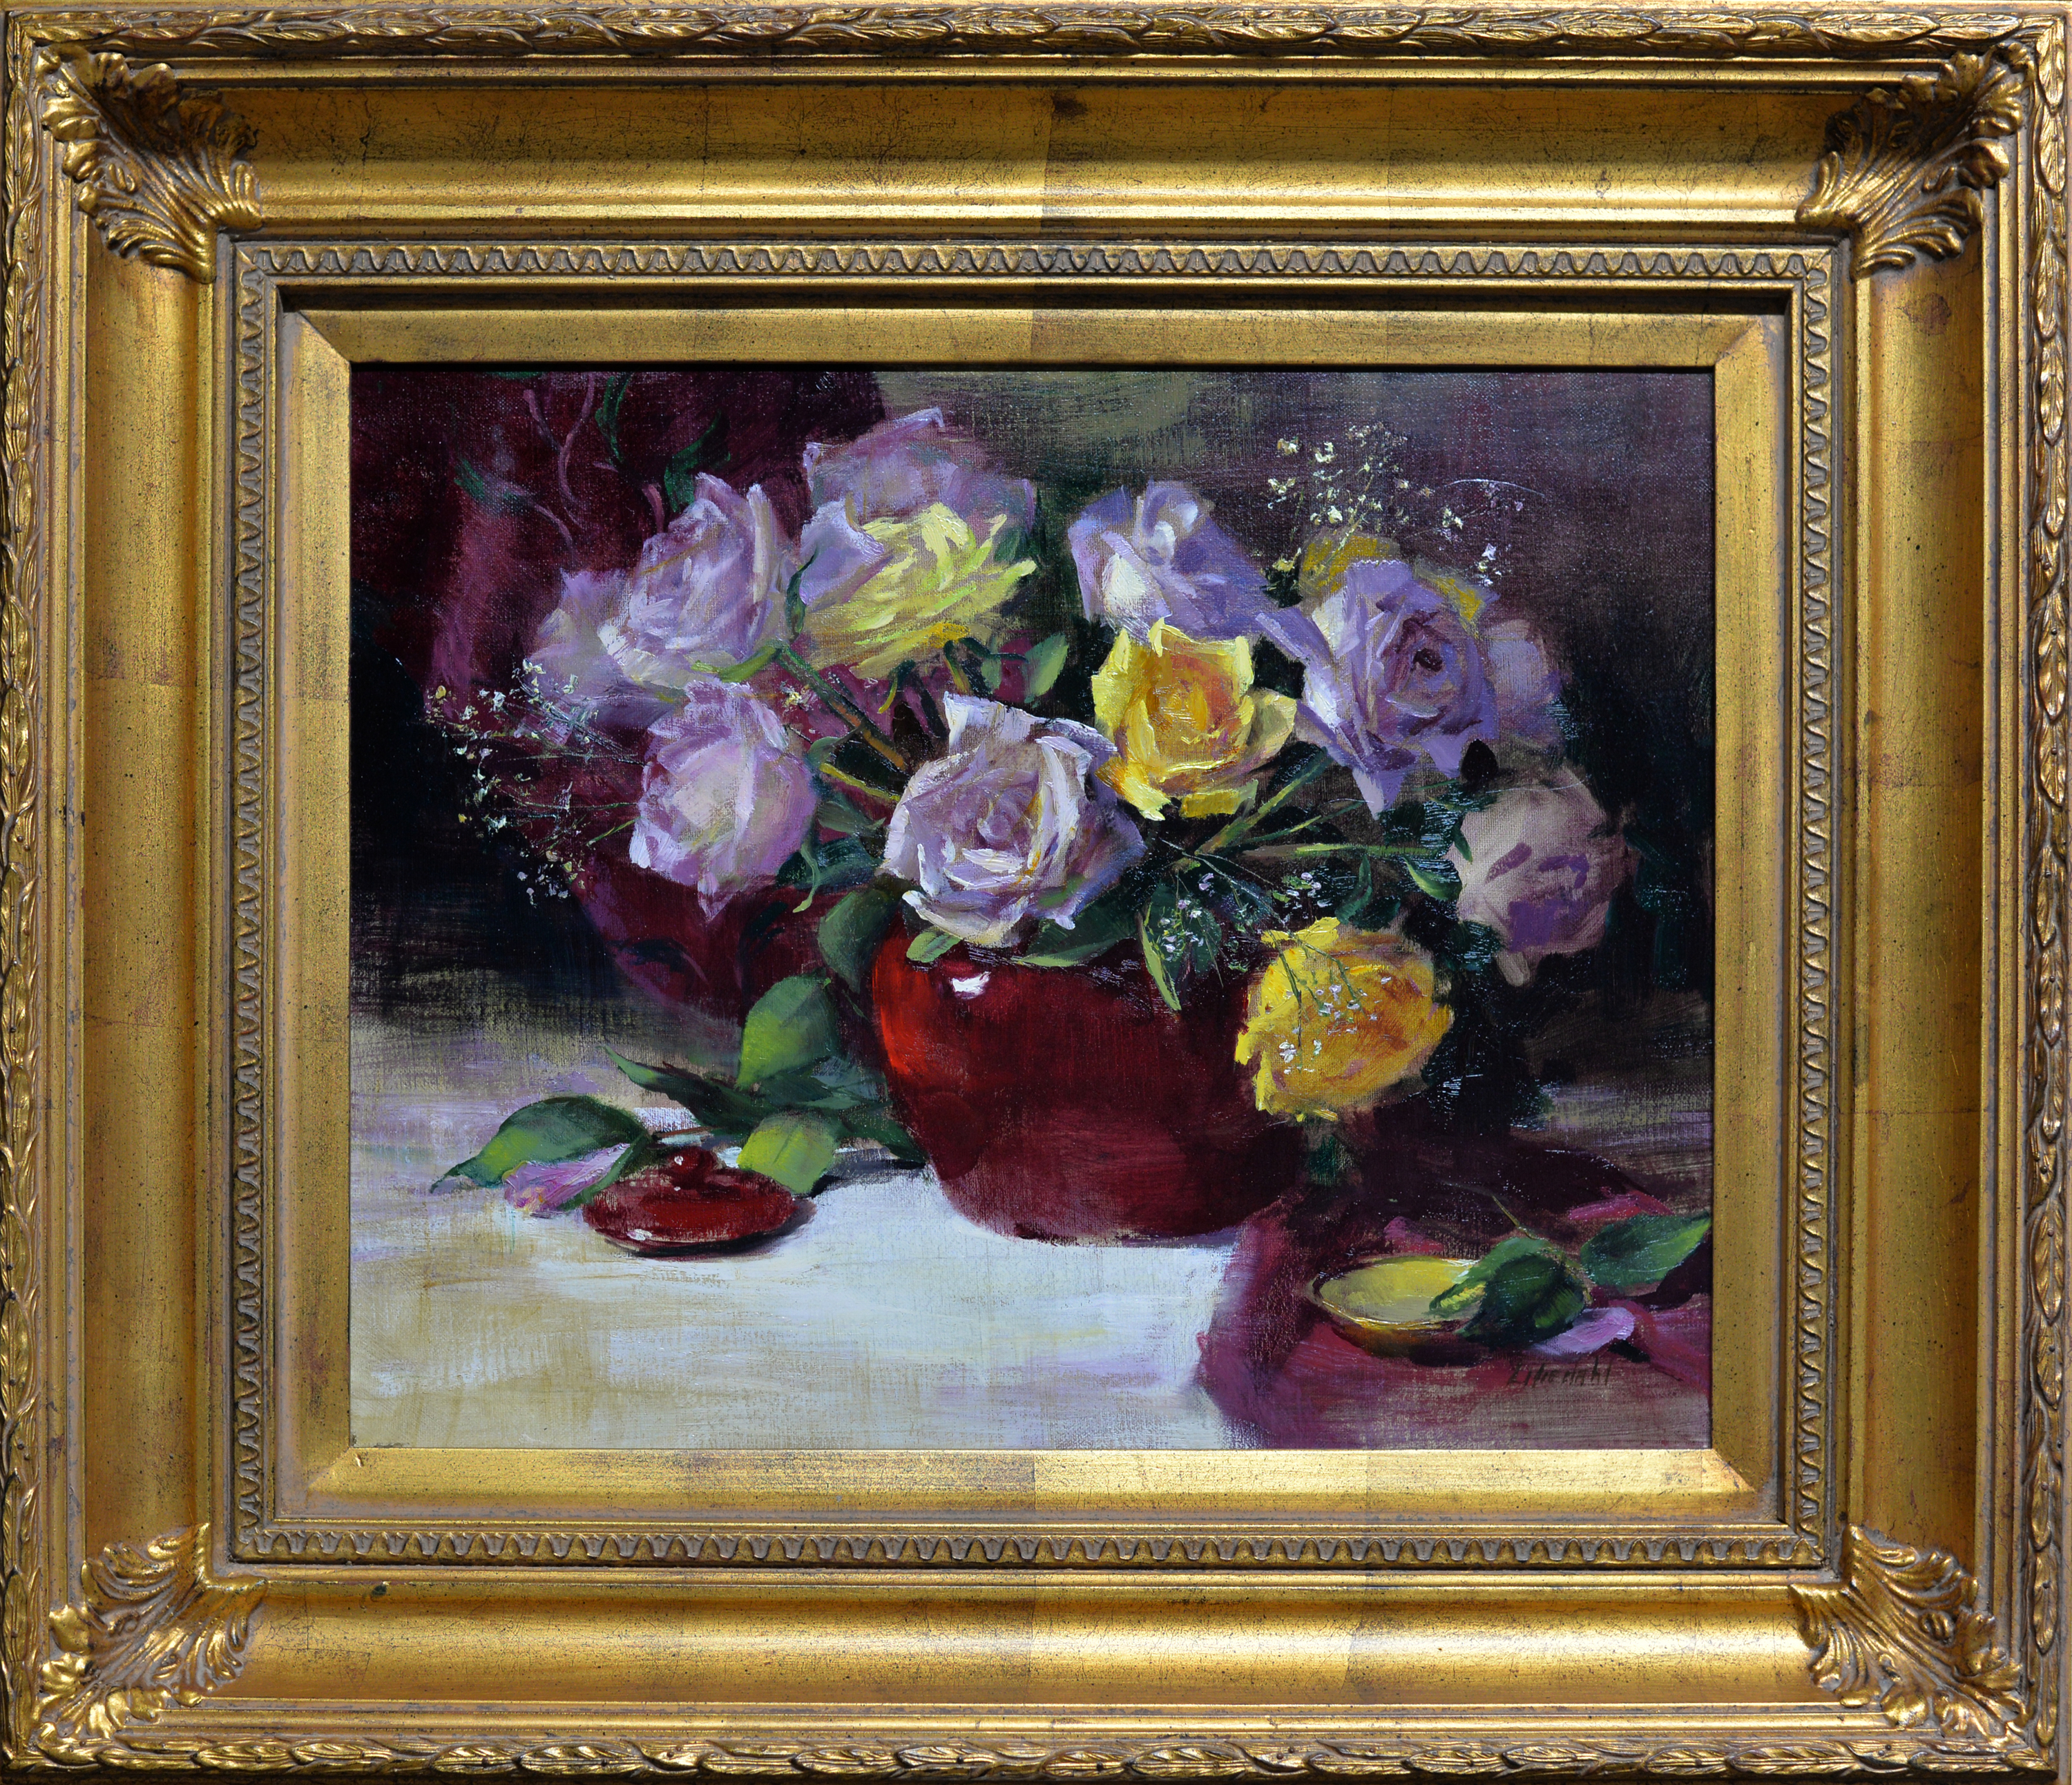 Purple and yellow roses framed d610 mzmgek